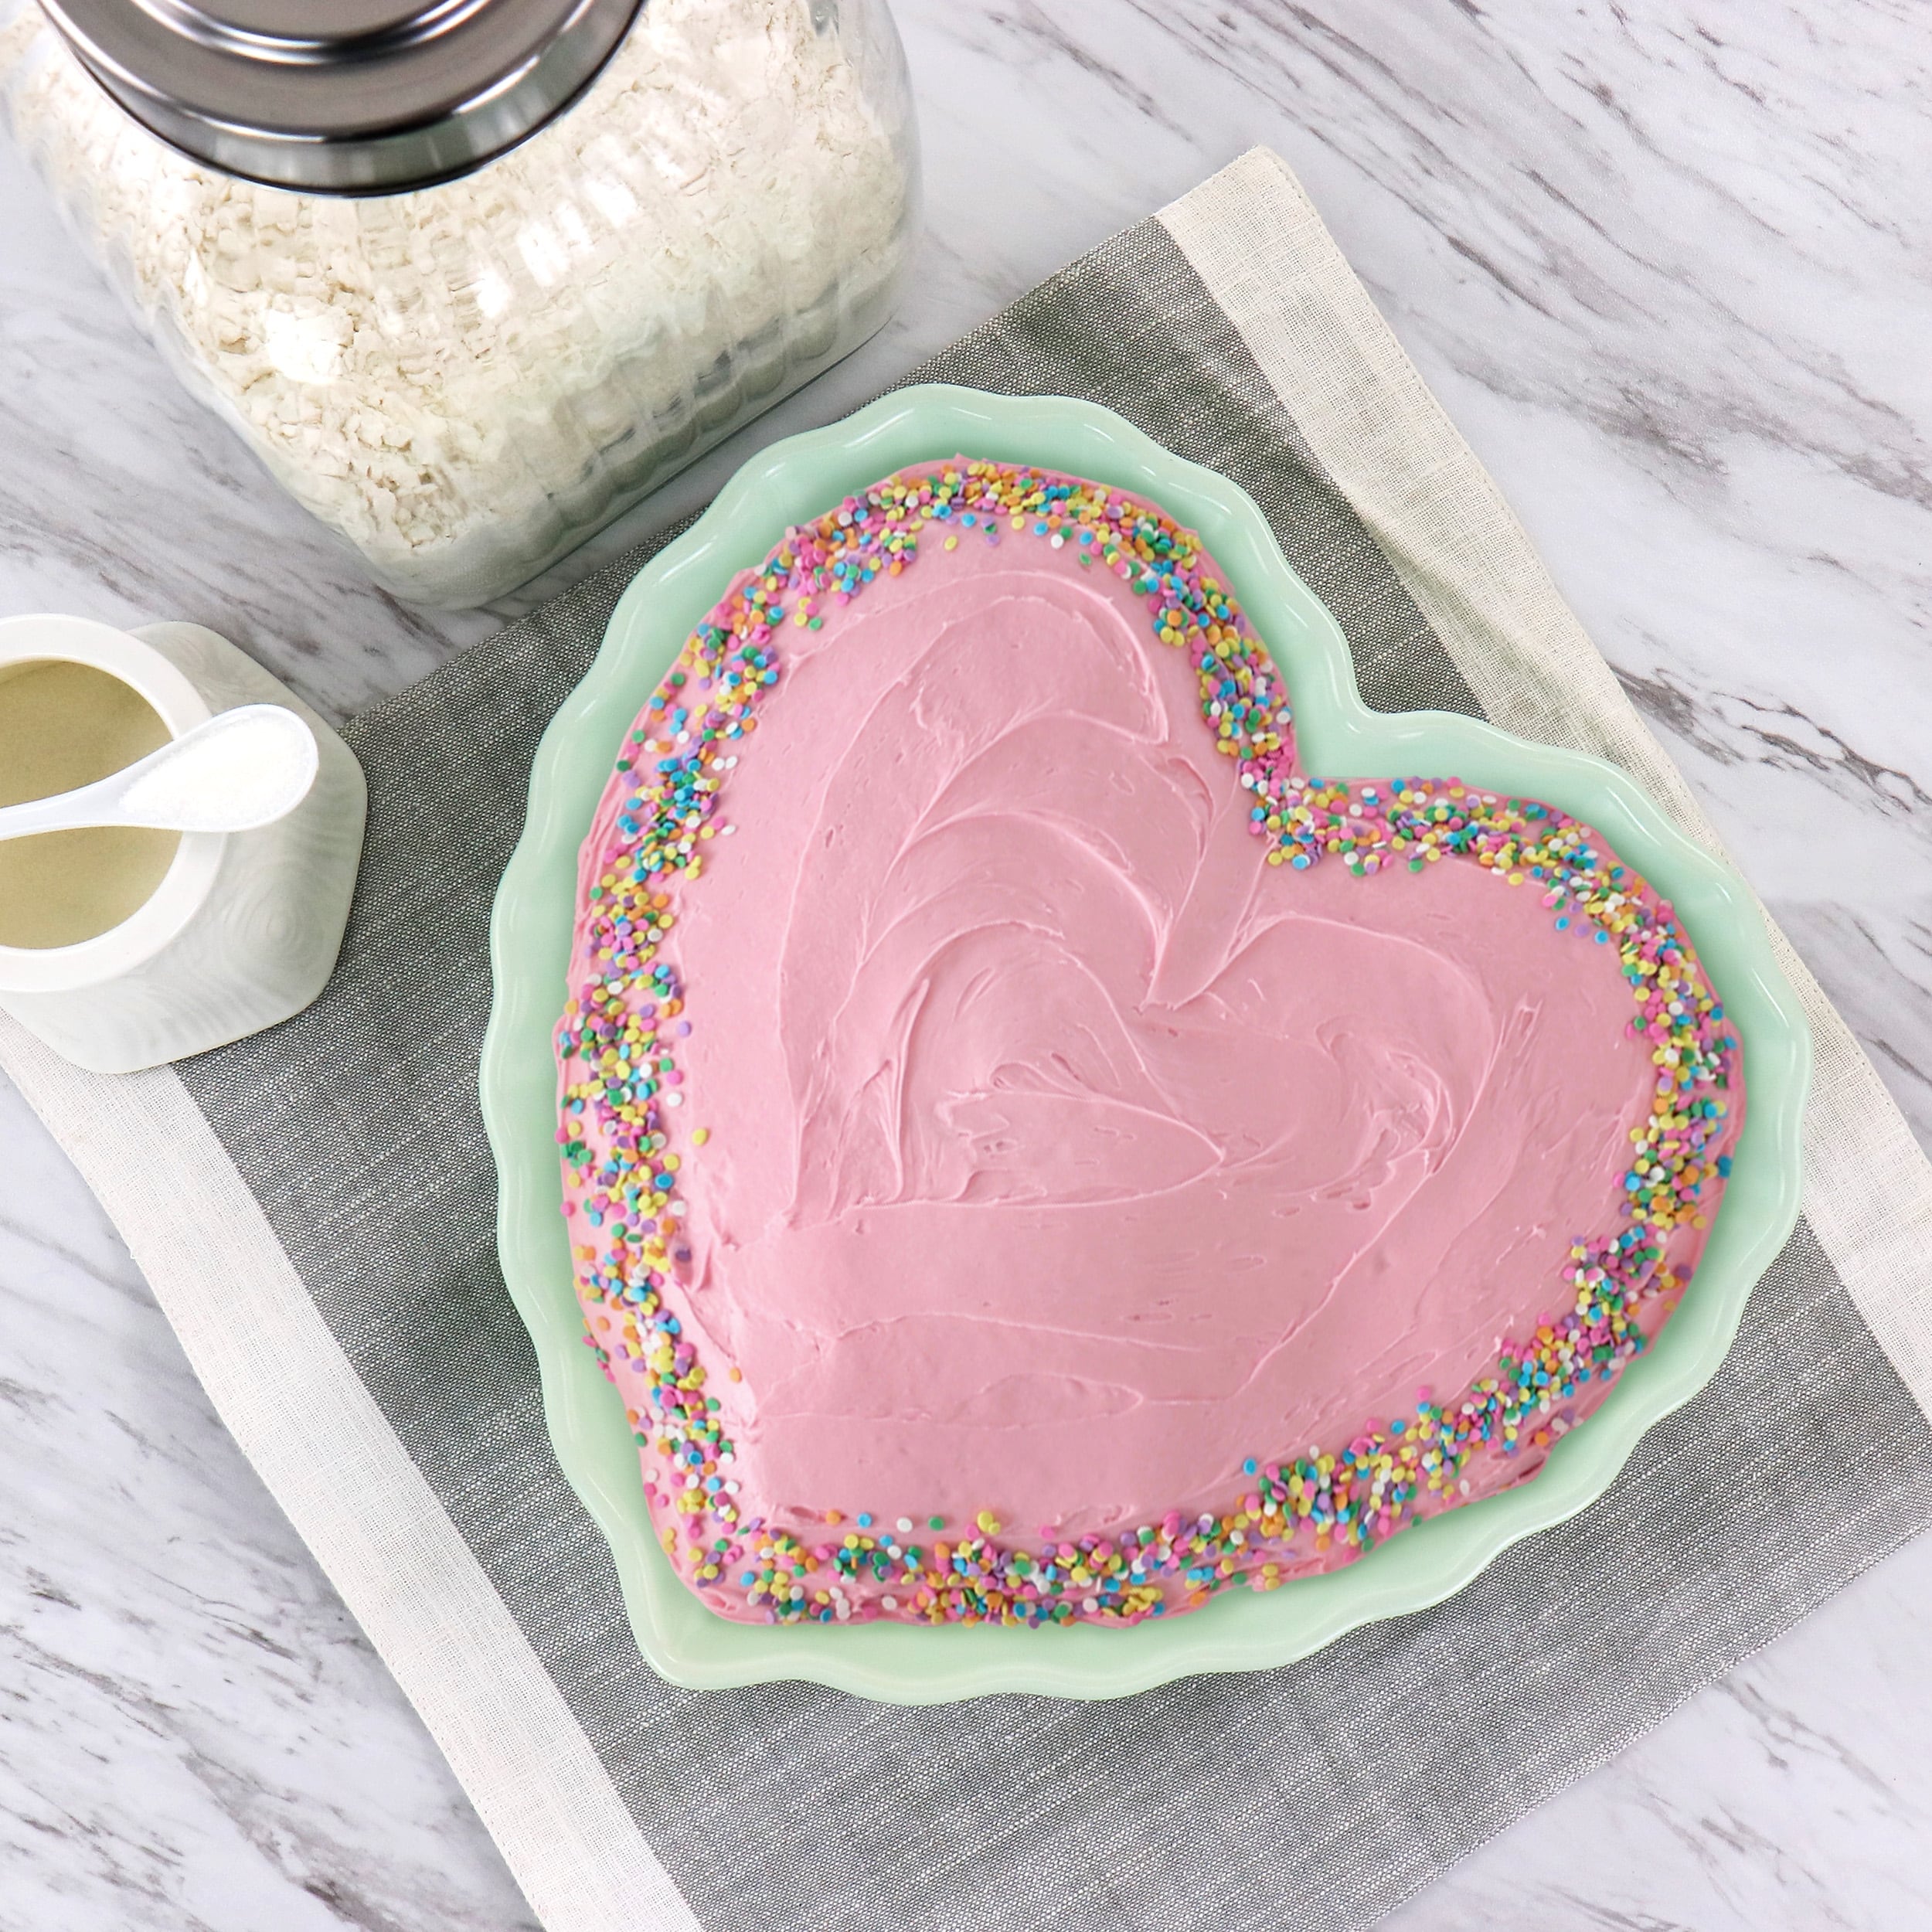 https://ak1.ostkcdn.com/images/products/is/images/direct/c35d584ec11a7226d0834464b192eef85df111a8/Martha-Stewart-11in-Heart-Shaped-Stoneware-Cake-Pan-in-Mint.jpg